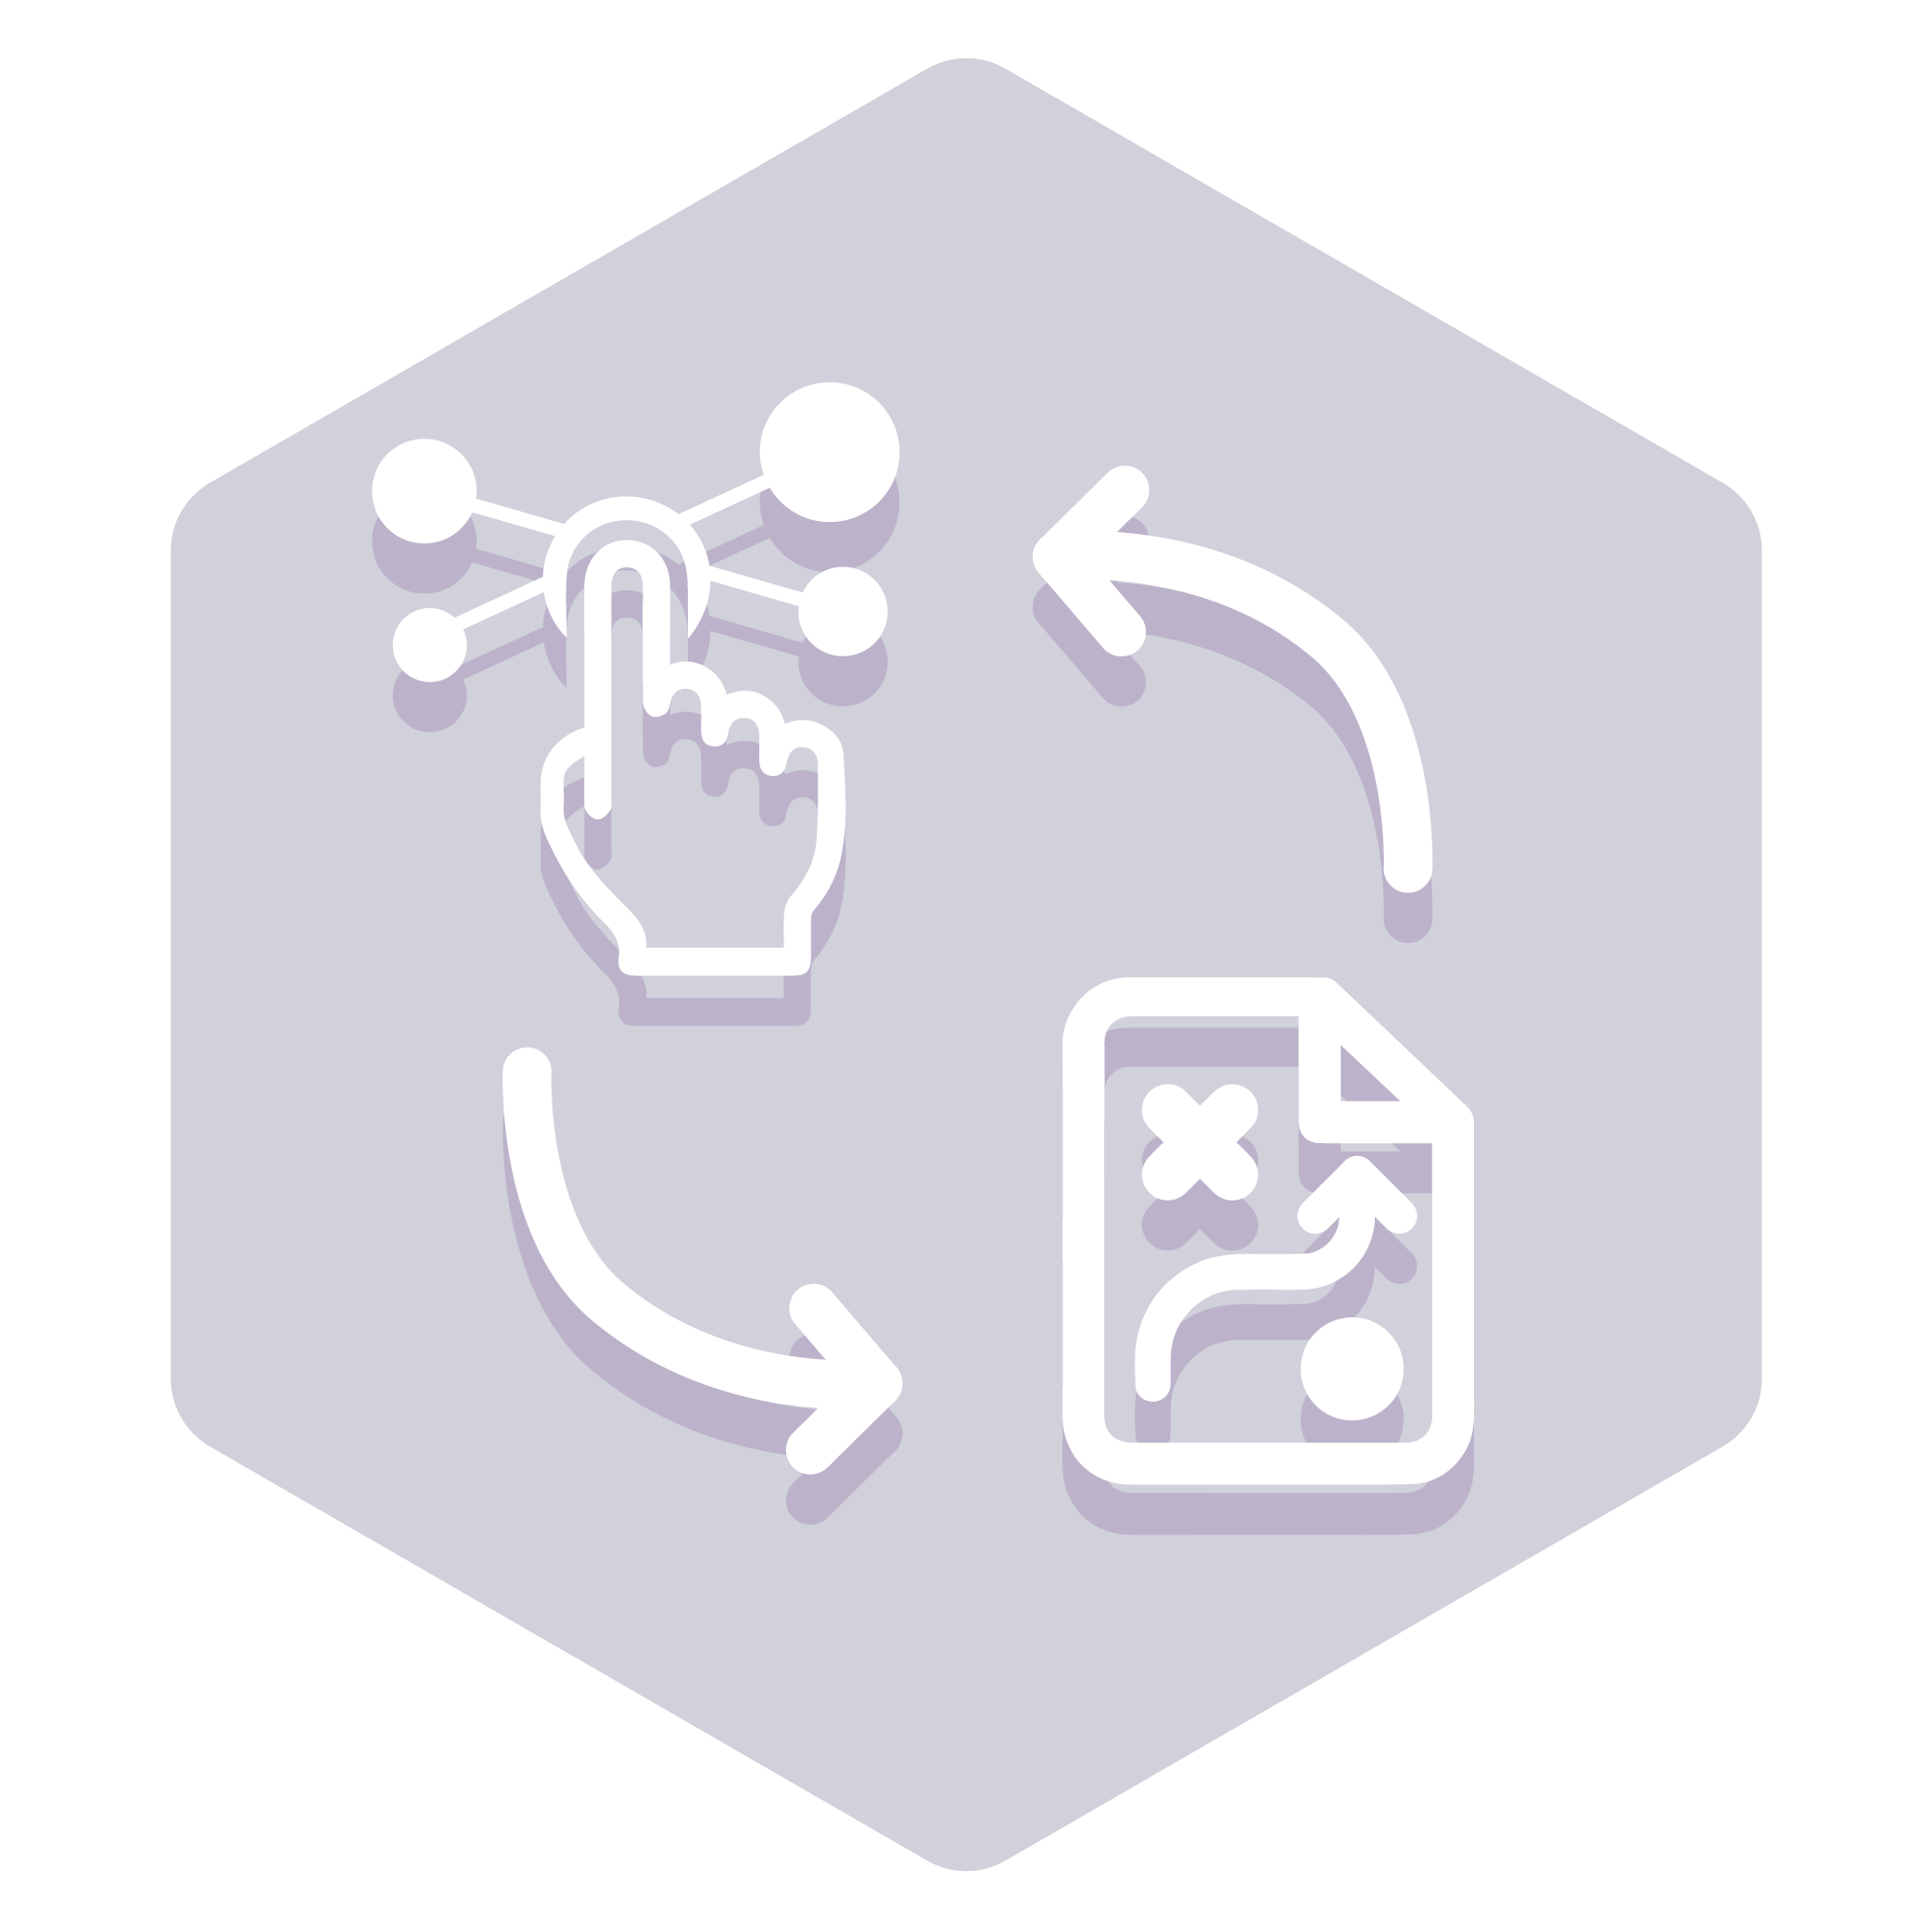 mission badge: User Experience (UX) Design